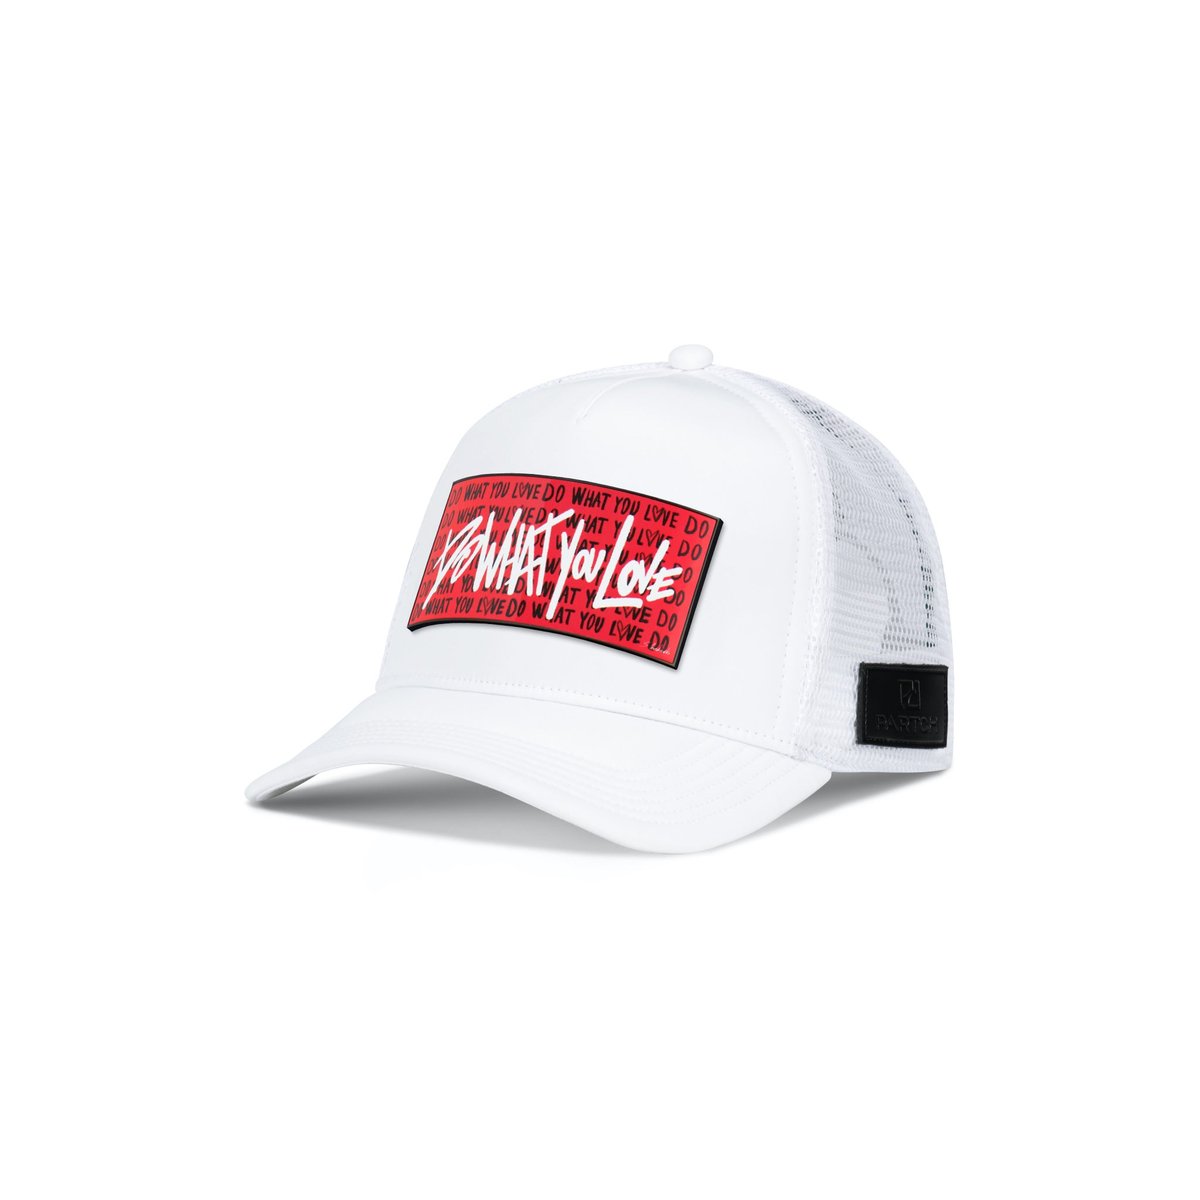 Removable Art DWYL, PARTCH Trucker Hat, Red, PARTCH